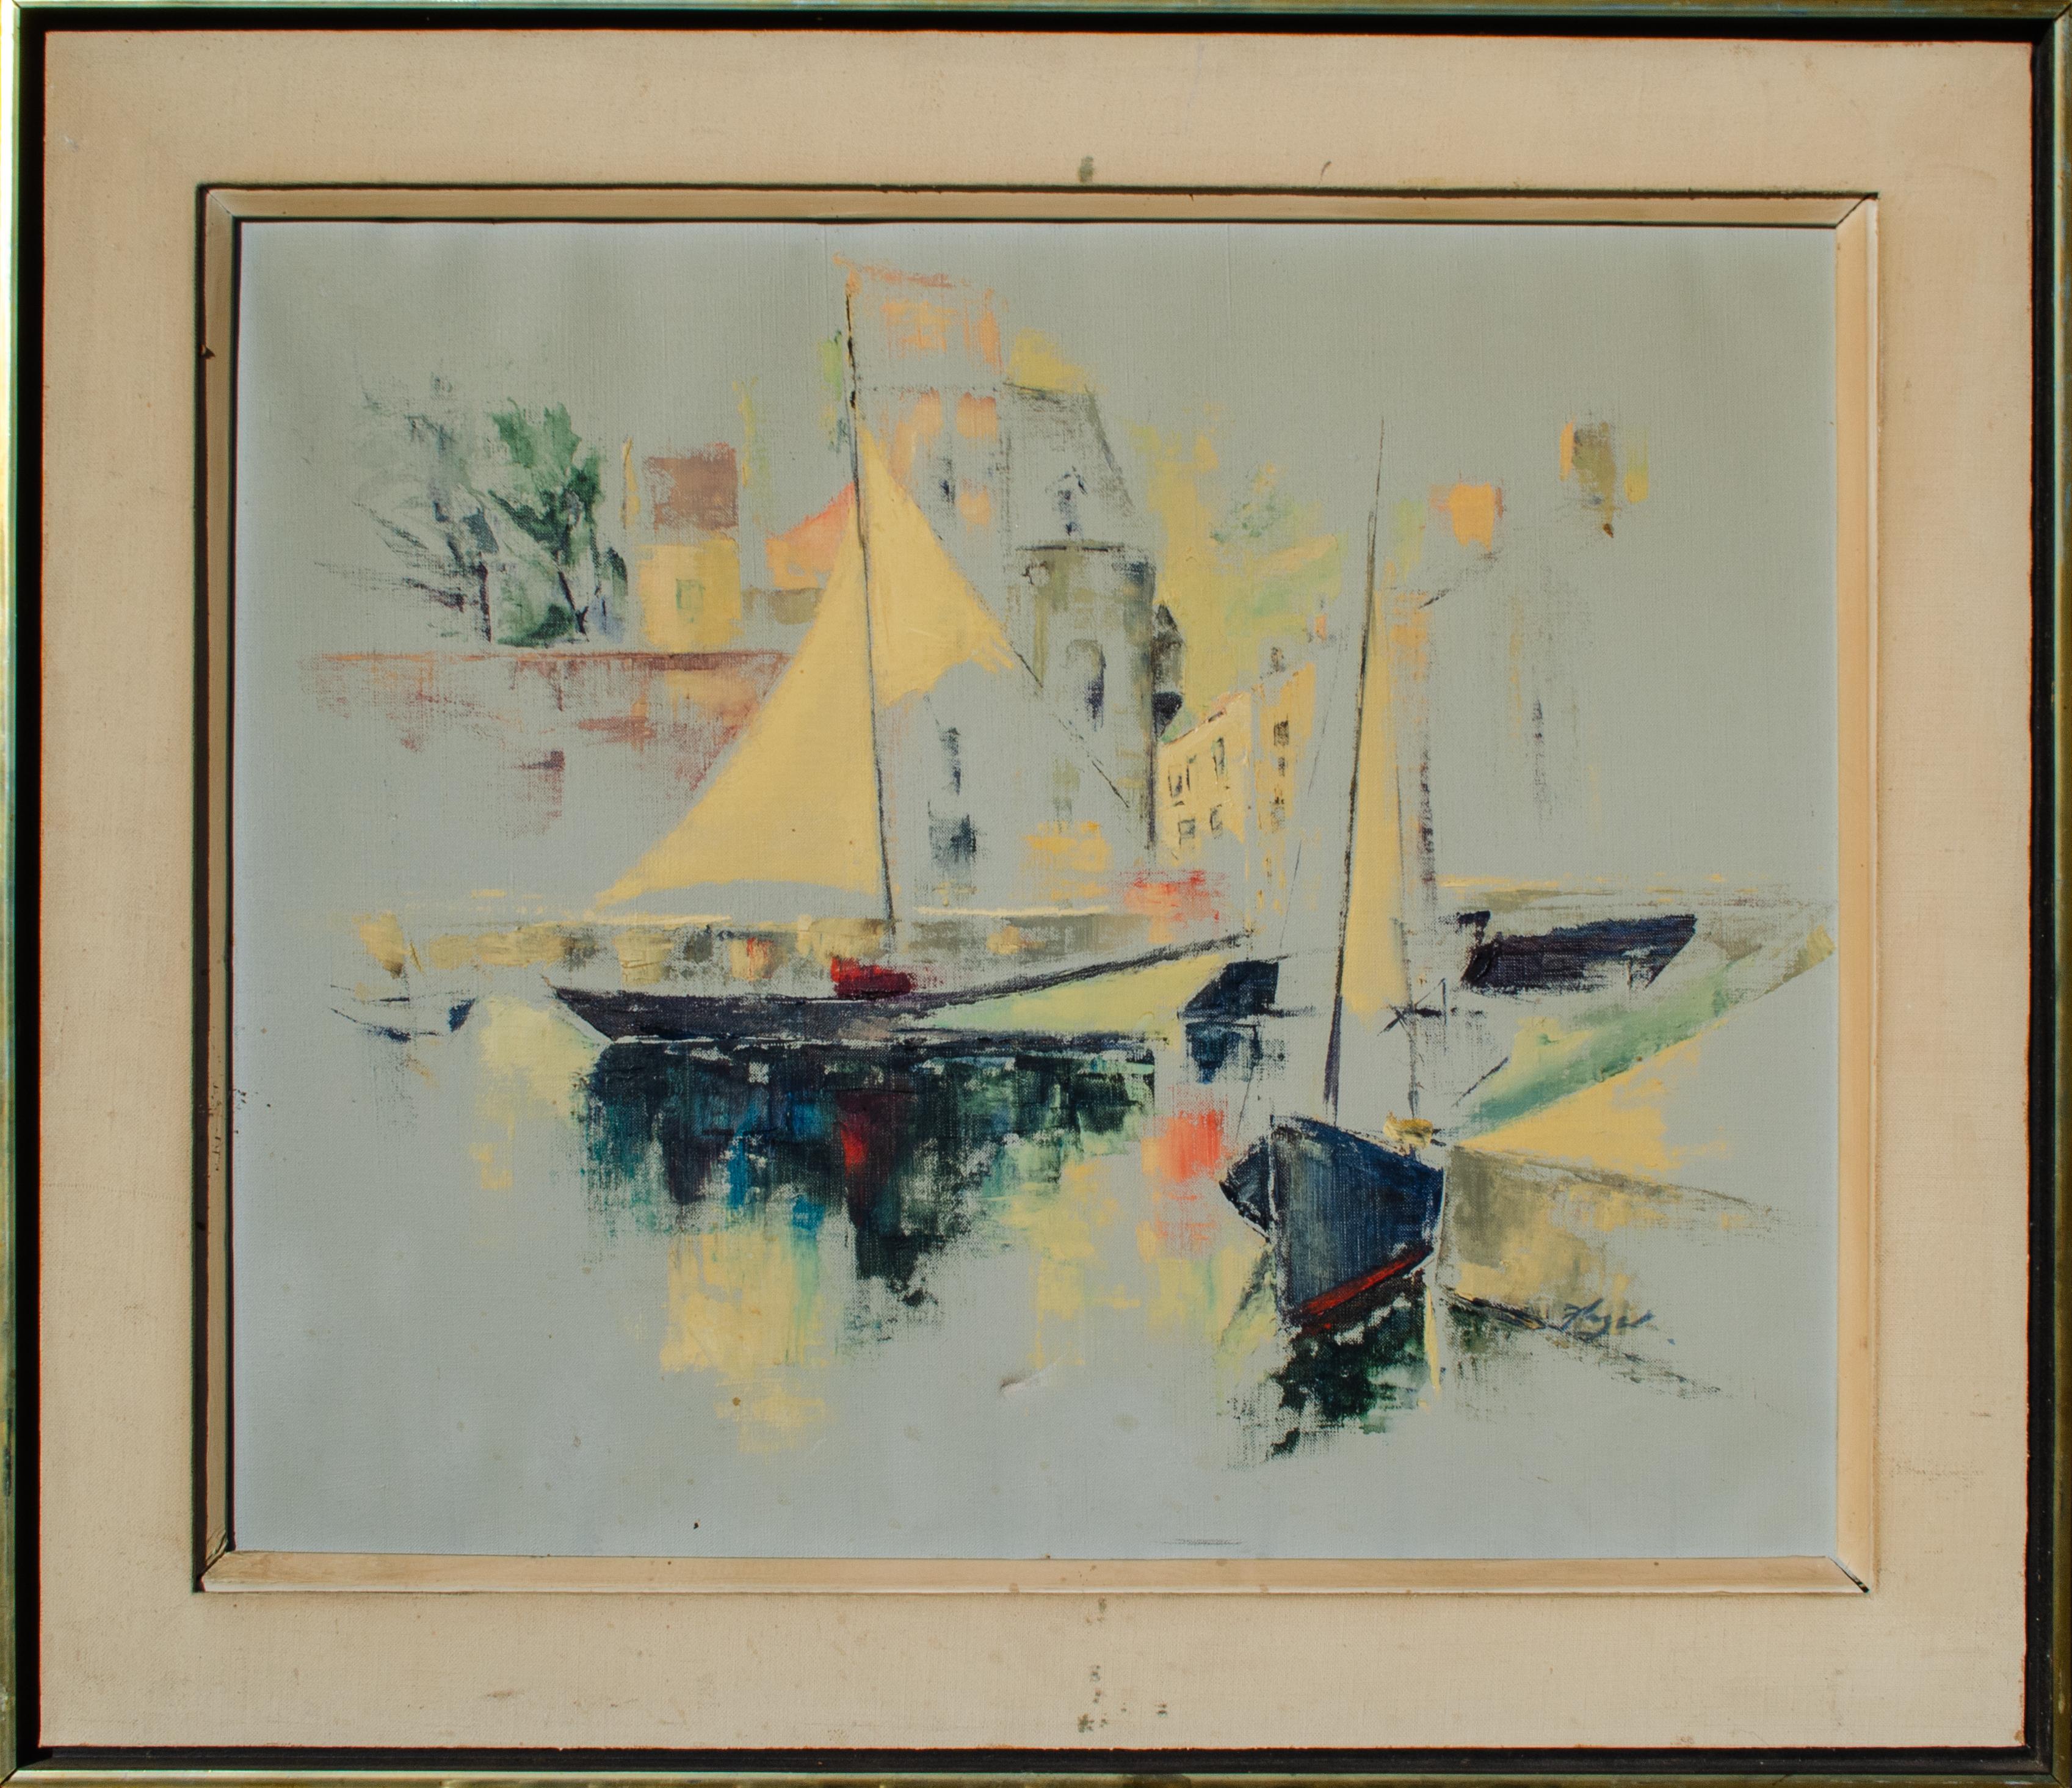 Sailboats at Port by Mystery American Artist